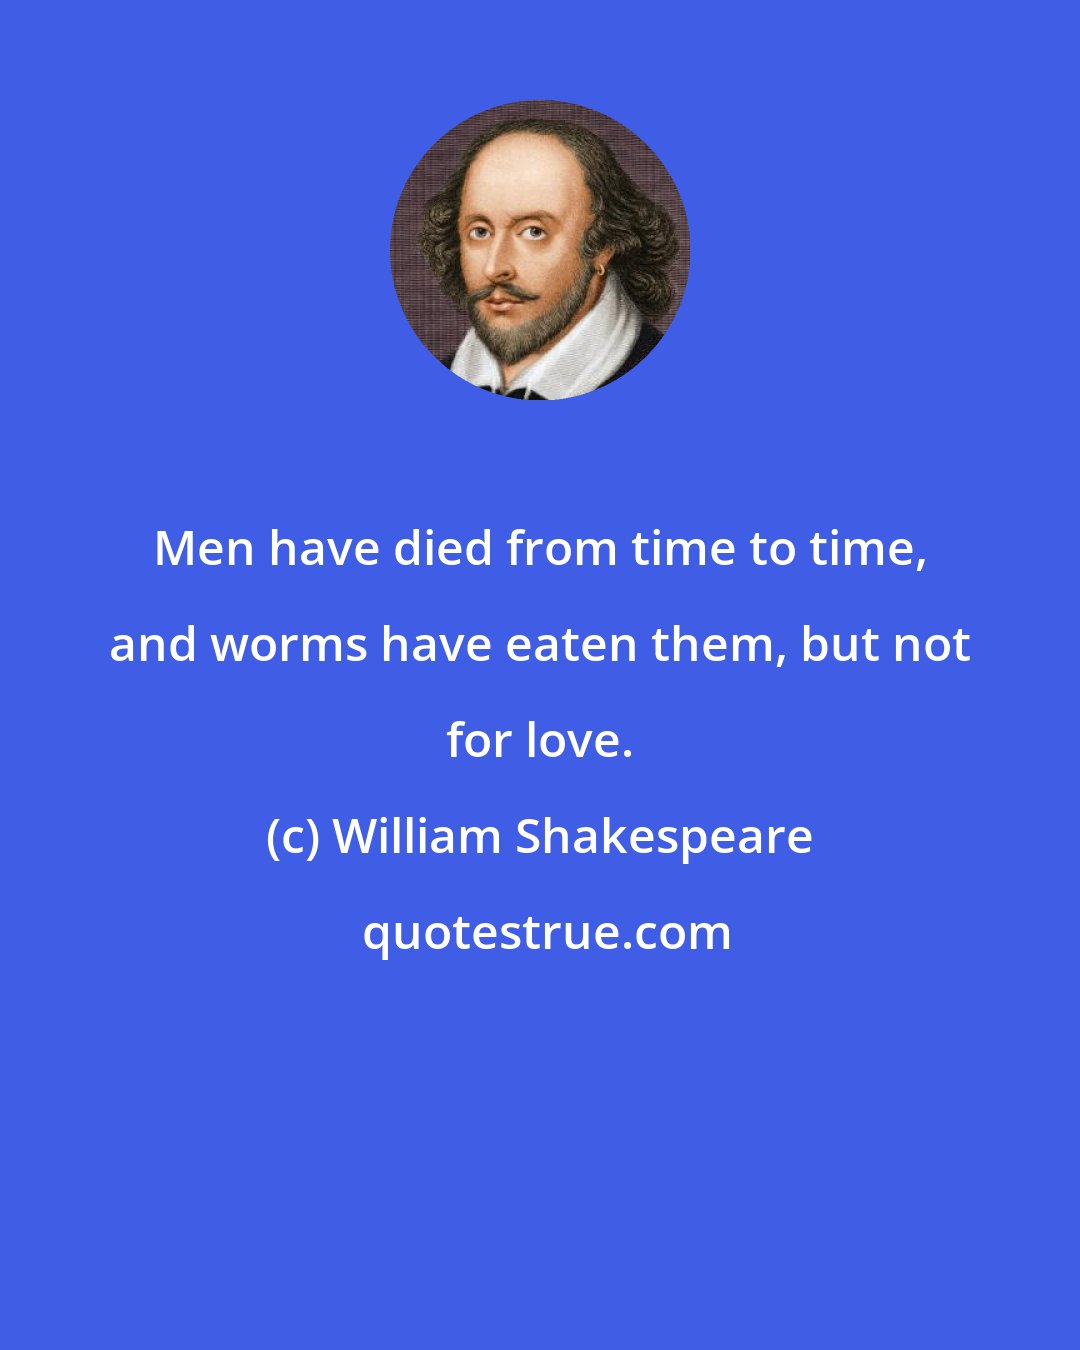 William Shakespeare: Men have died from time to time, and worms have eaten them, but not for love.